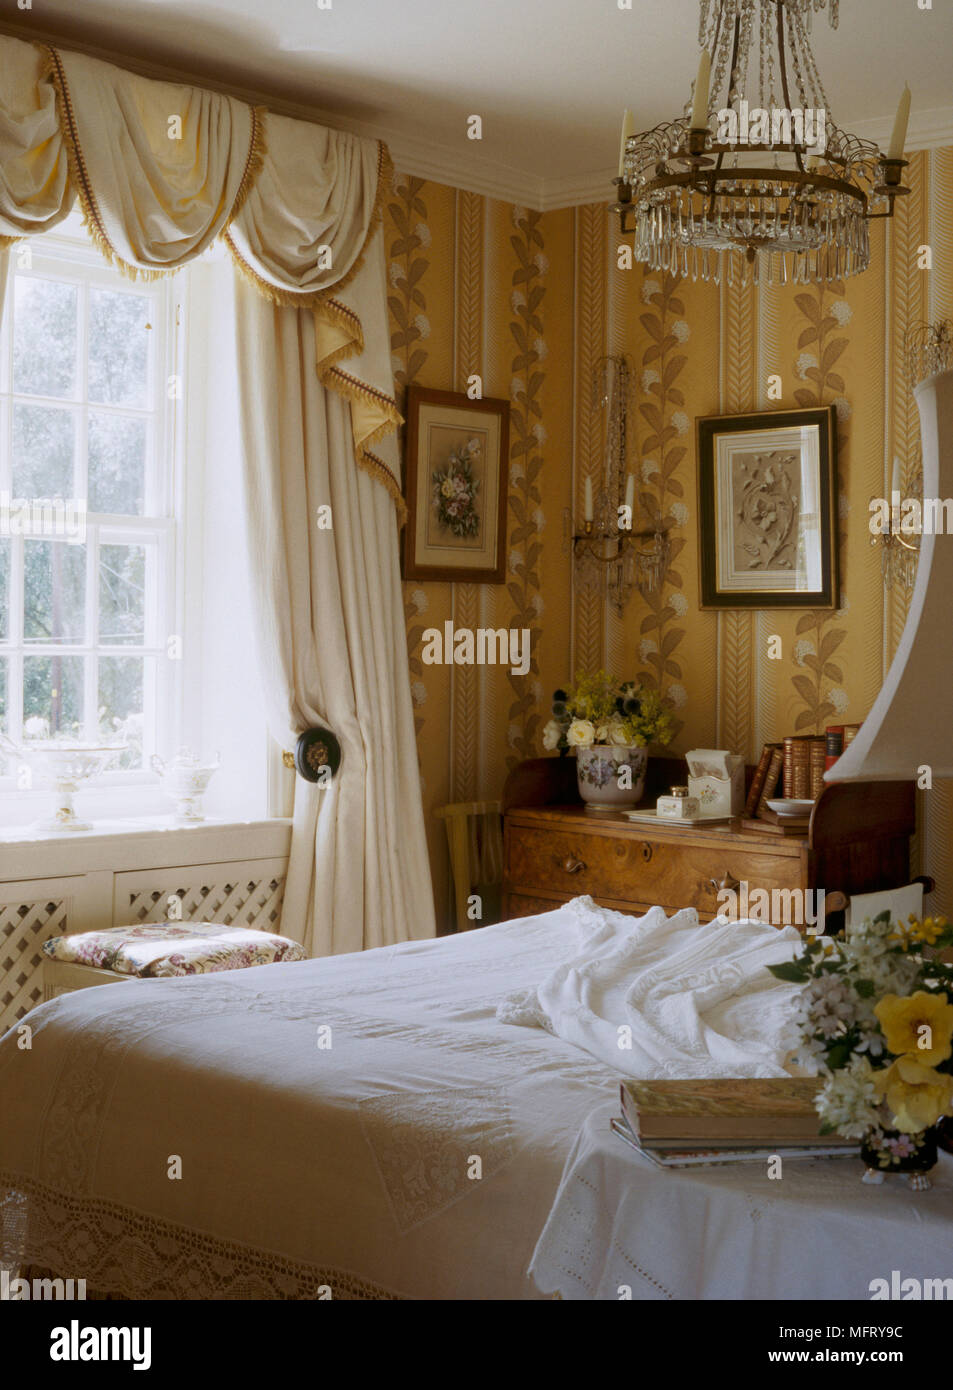 A detail of a traditional yellow bedroom with pattern wallpaper swag curtains double bed glass chandelier Stock Photo